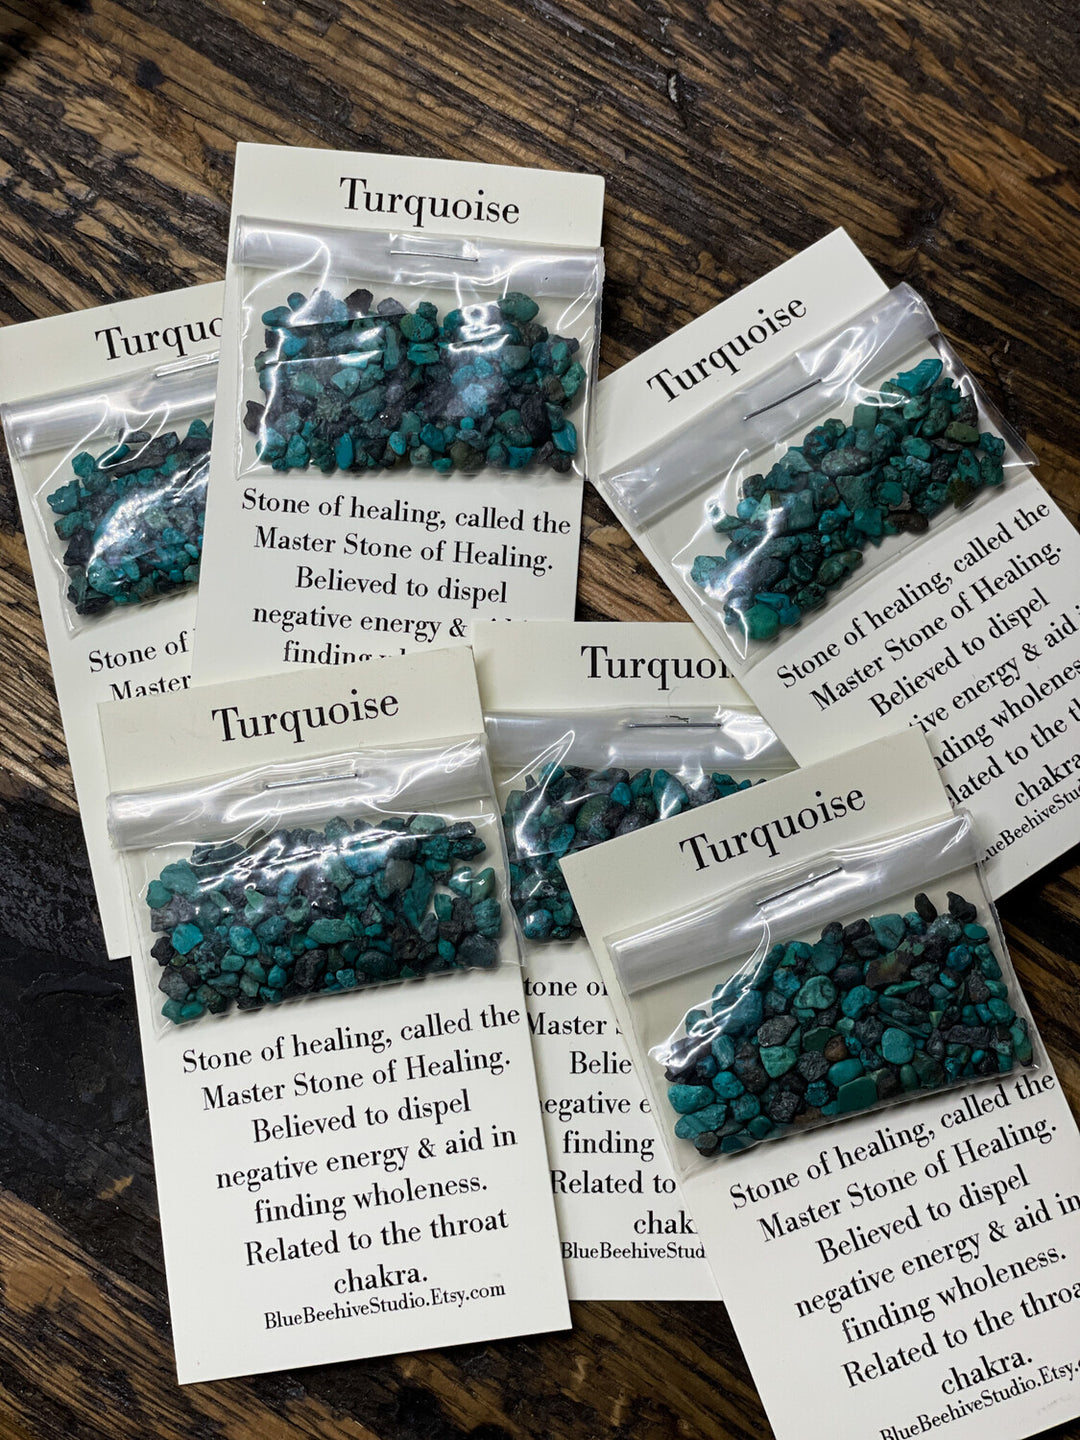 Turquoise chips